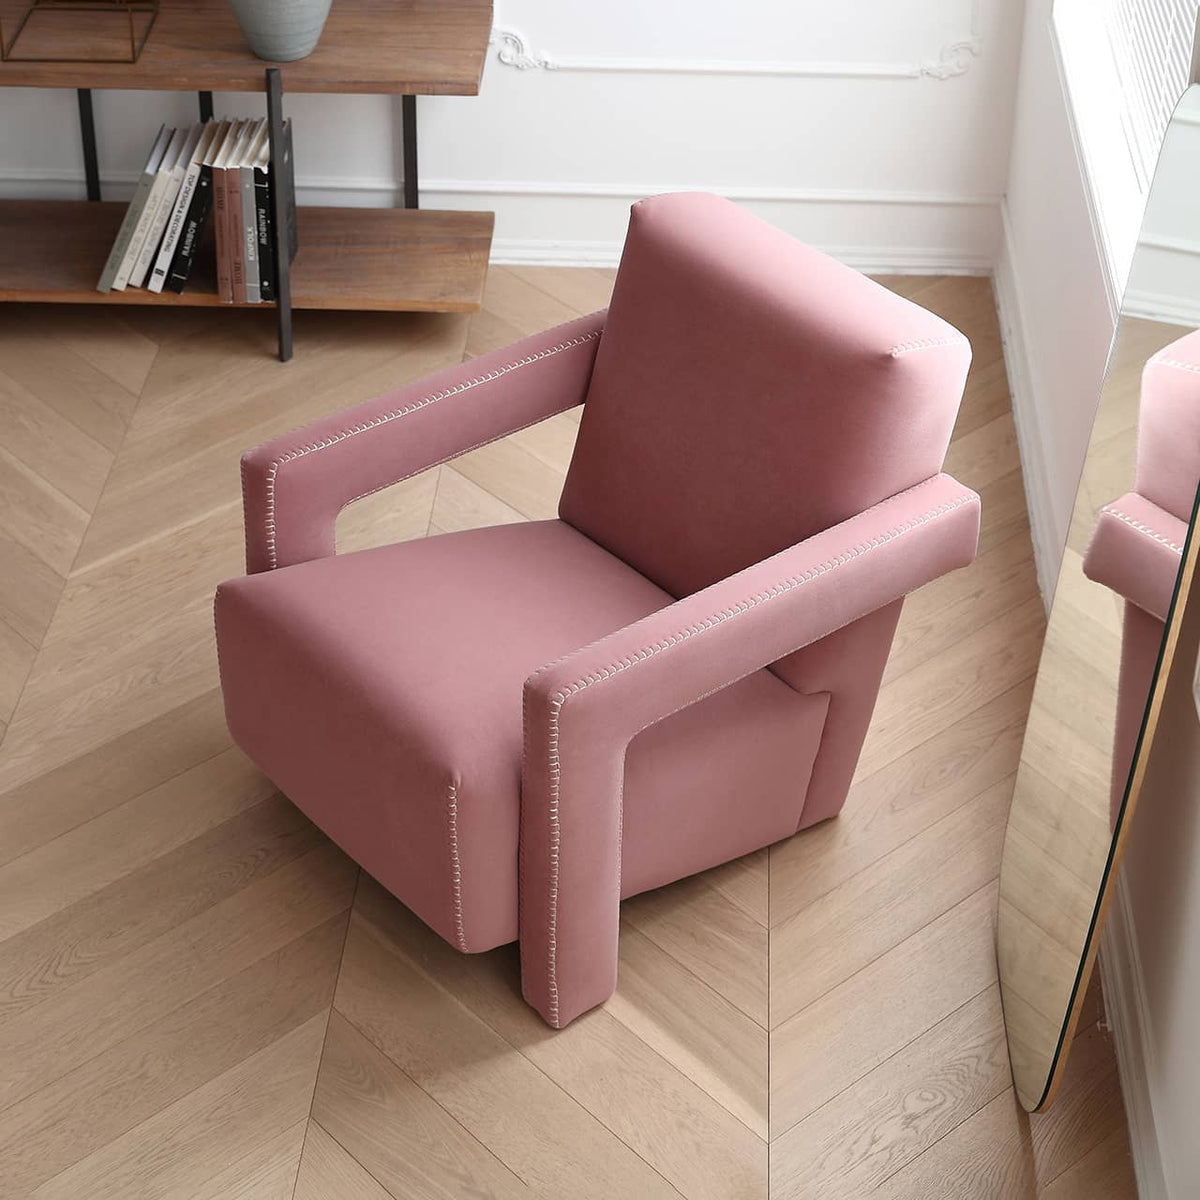 Luxurious Pink Pine Suede Chair - Stylish and Comfortable Seating my-356